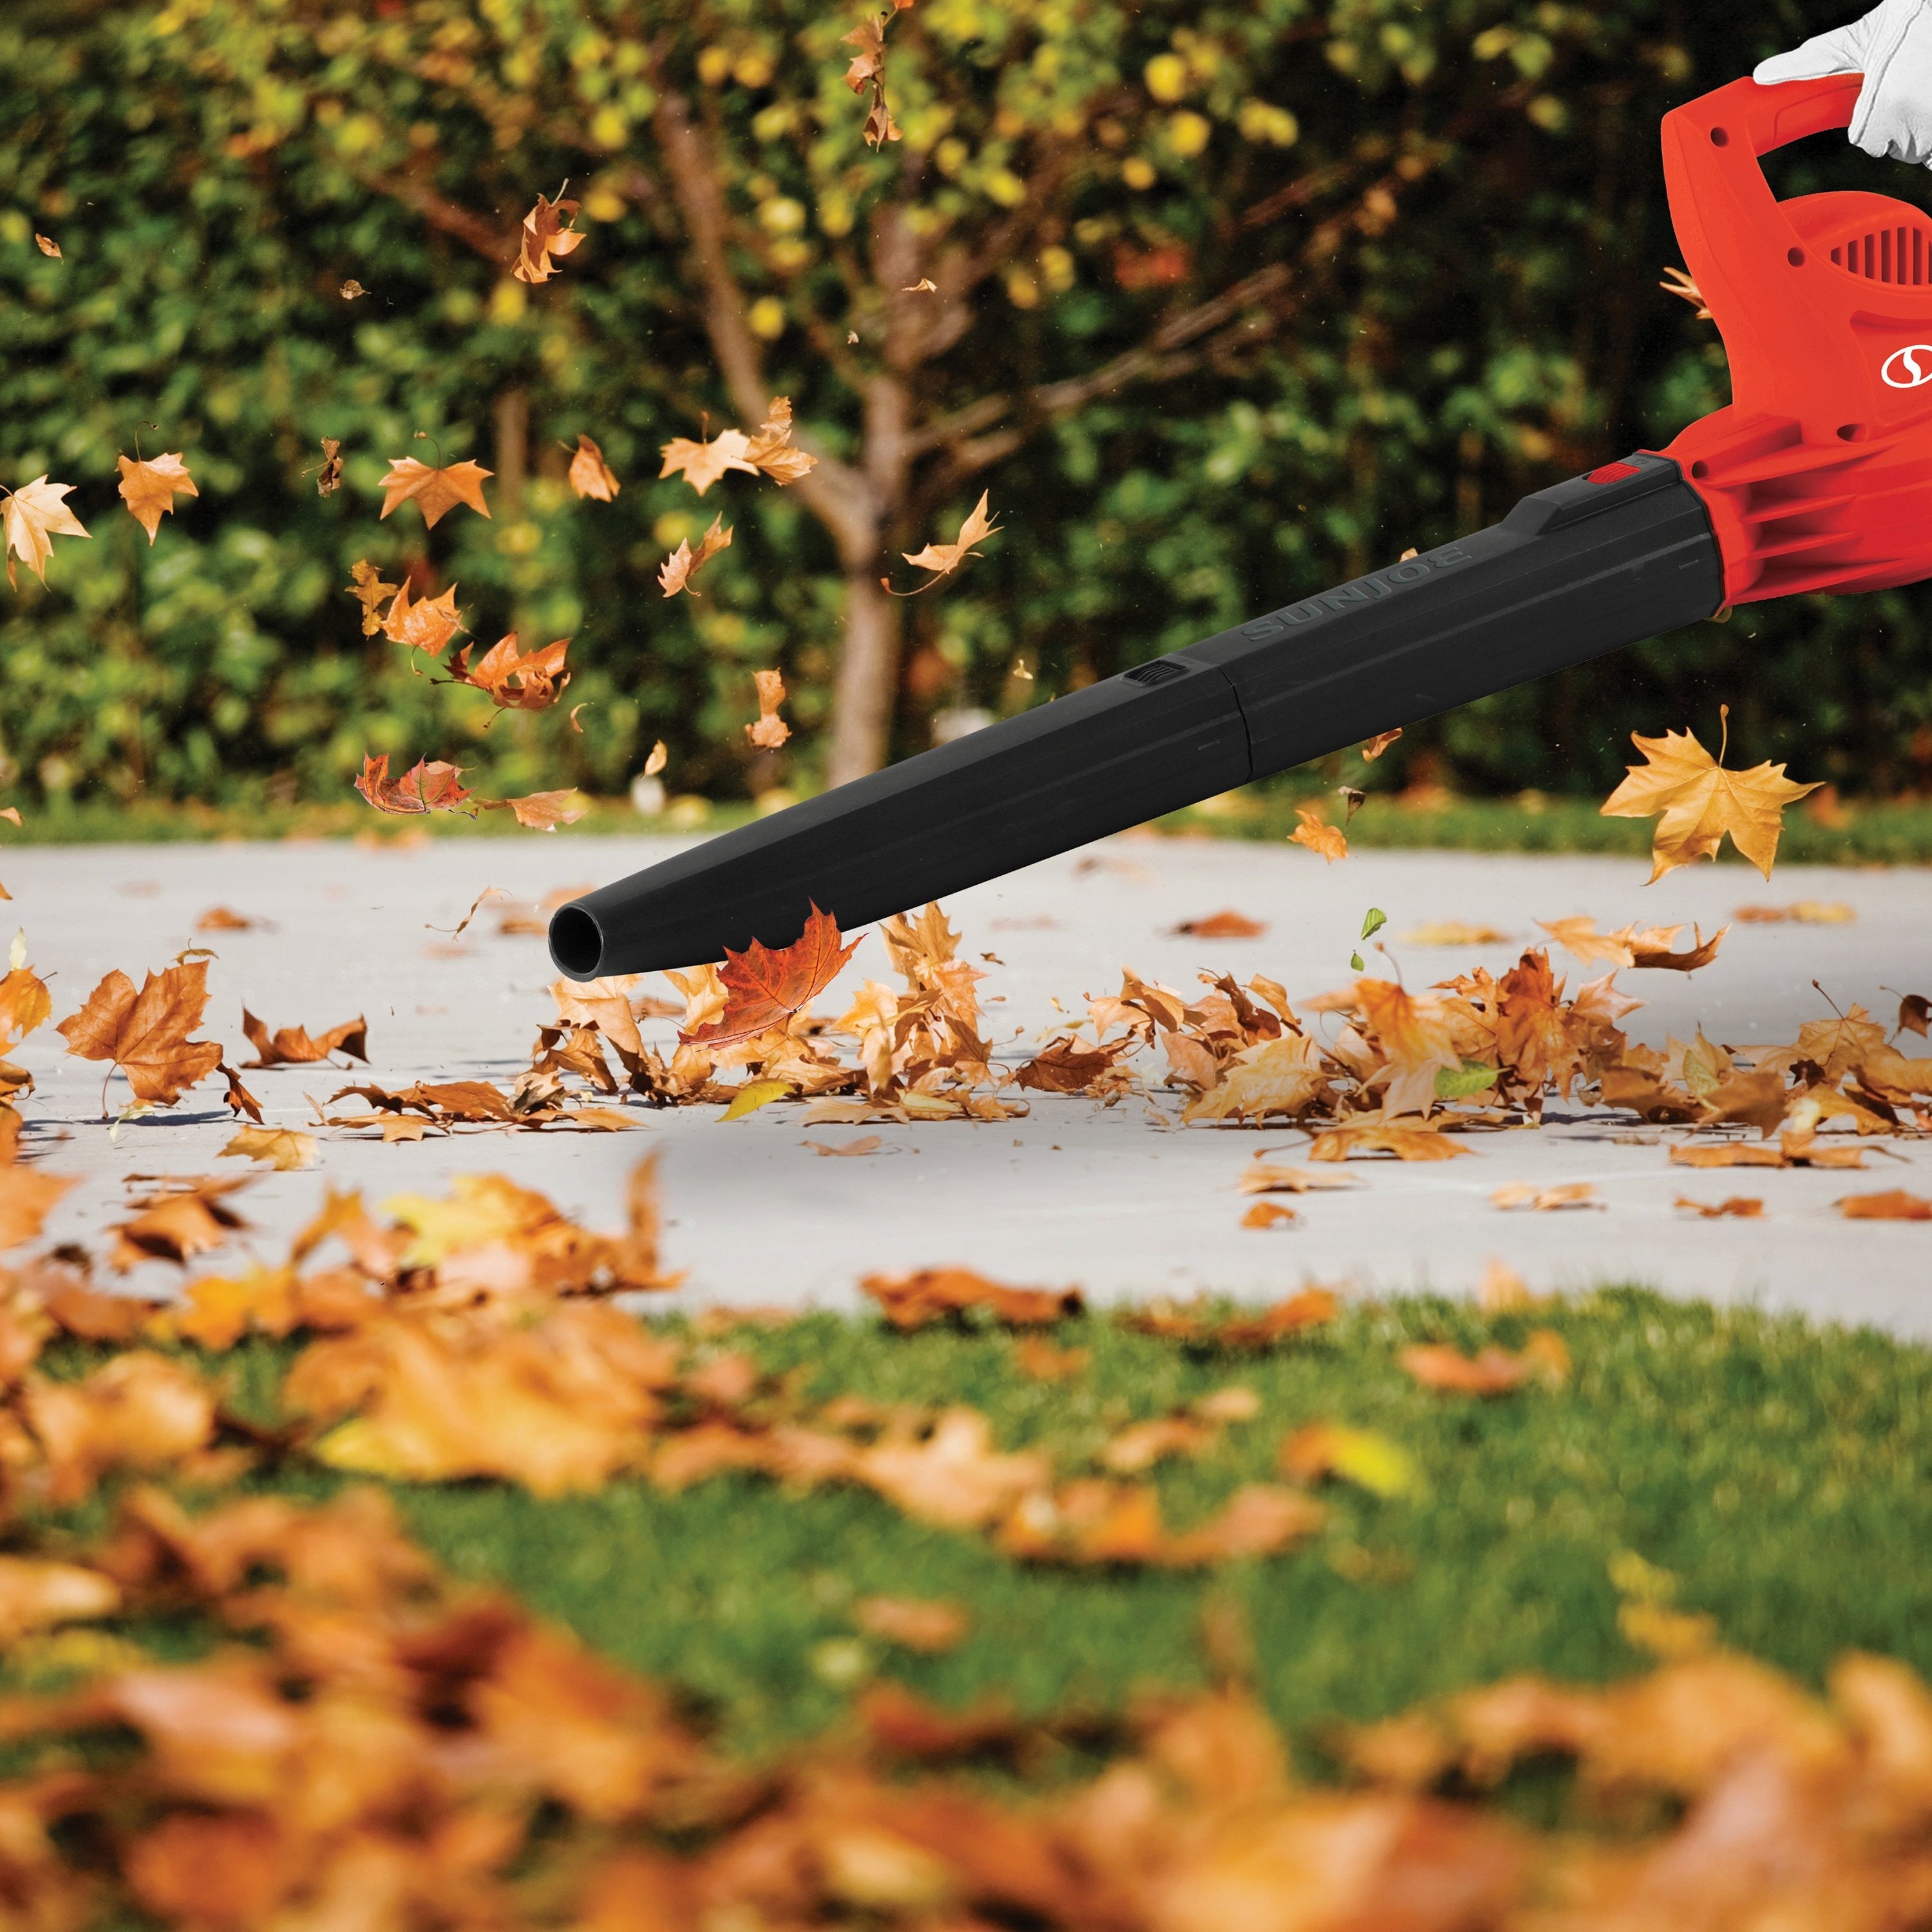 the red and black leaf blower blowing fall leaves